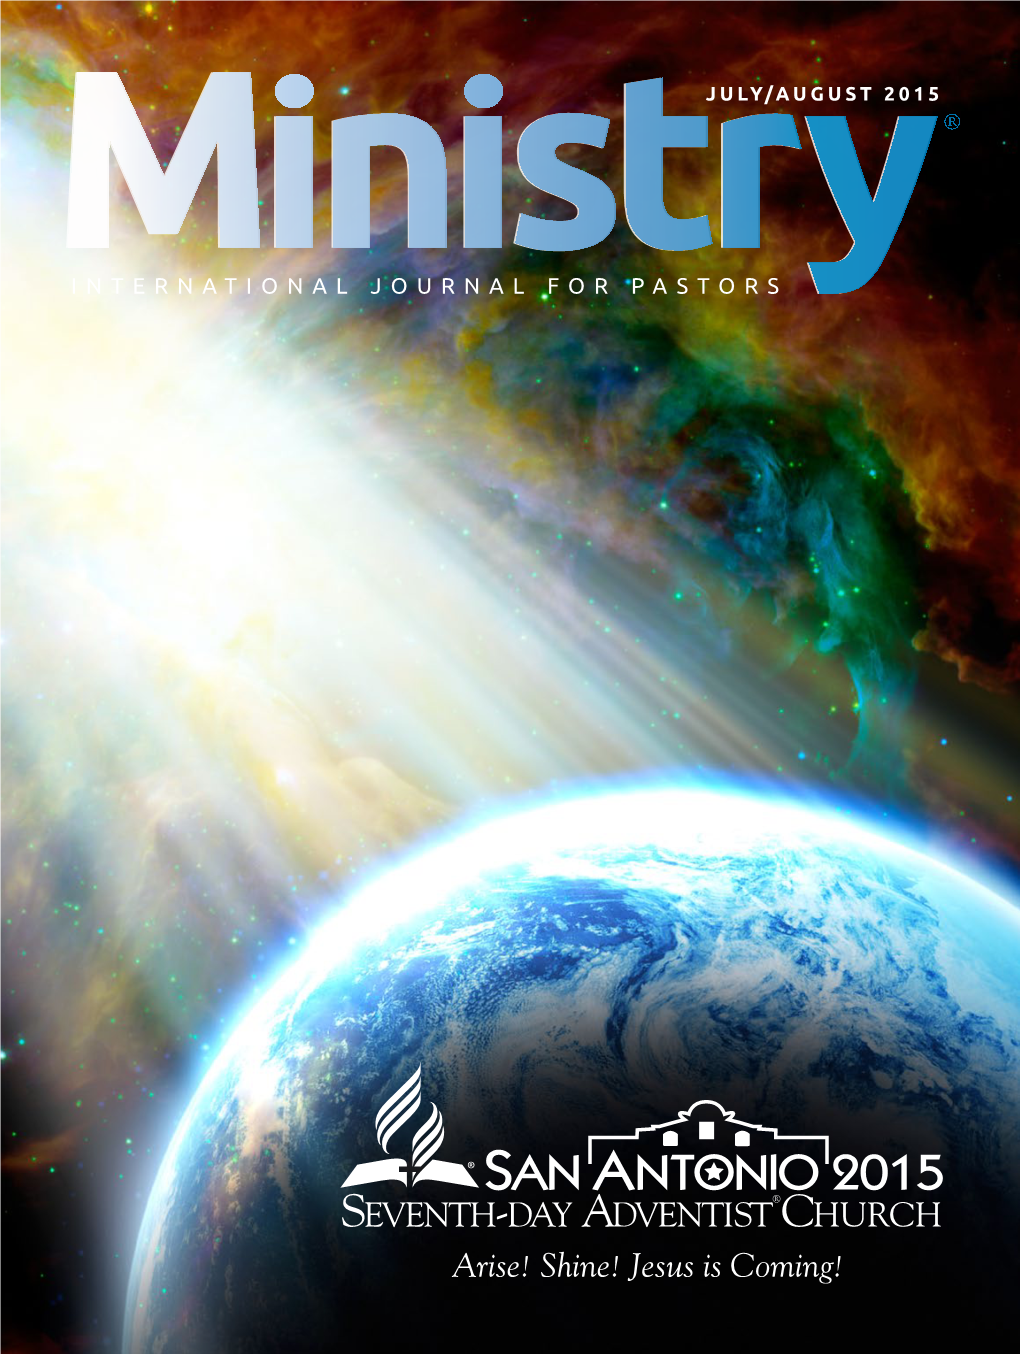 INTERNATIONAL JOURNAL for PASTORS EXPAND Your Brand with HOPESOURCE’S Multi-Channel Marketing